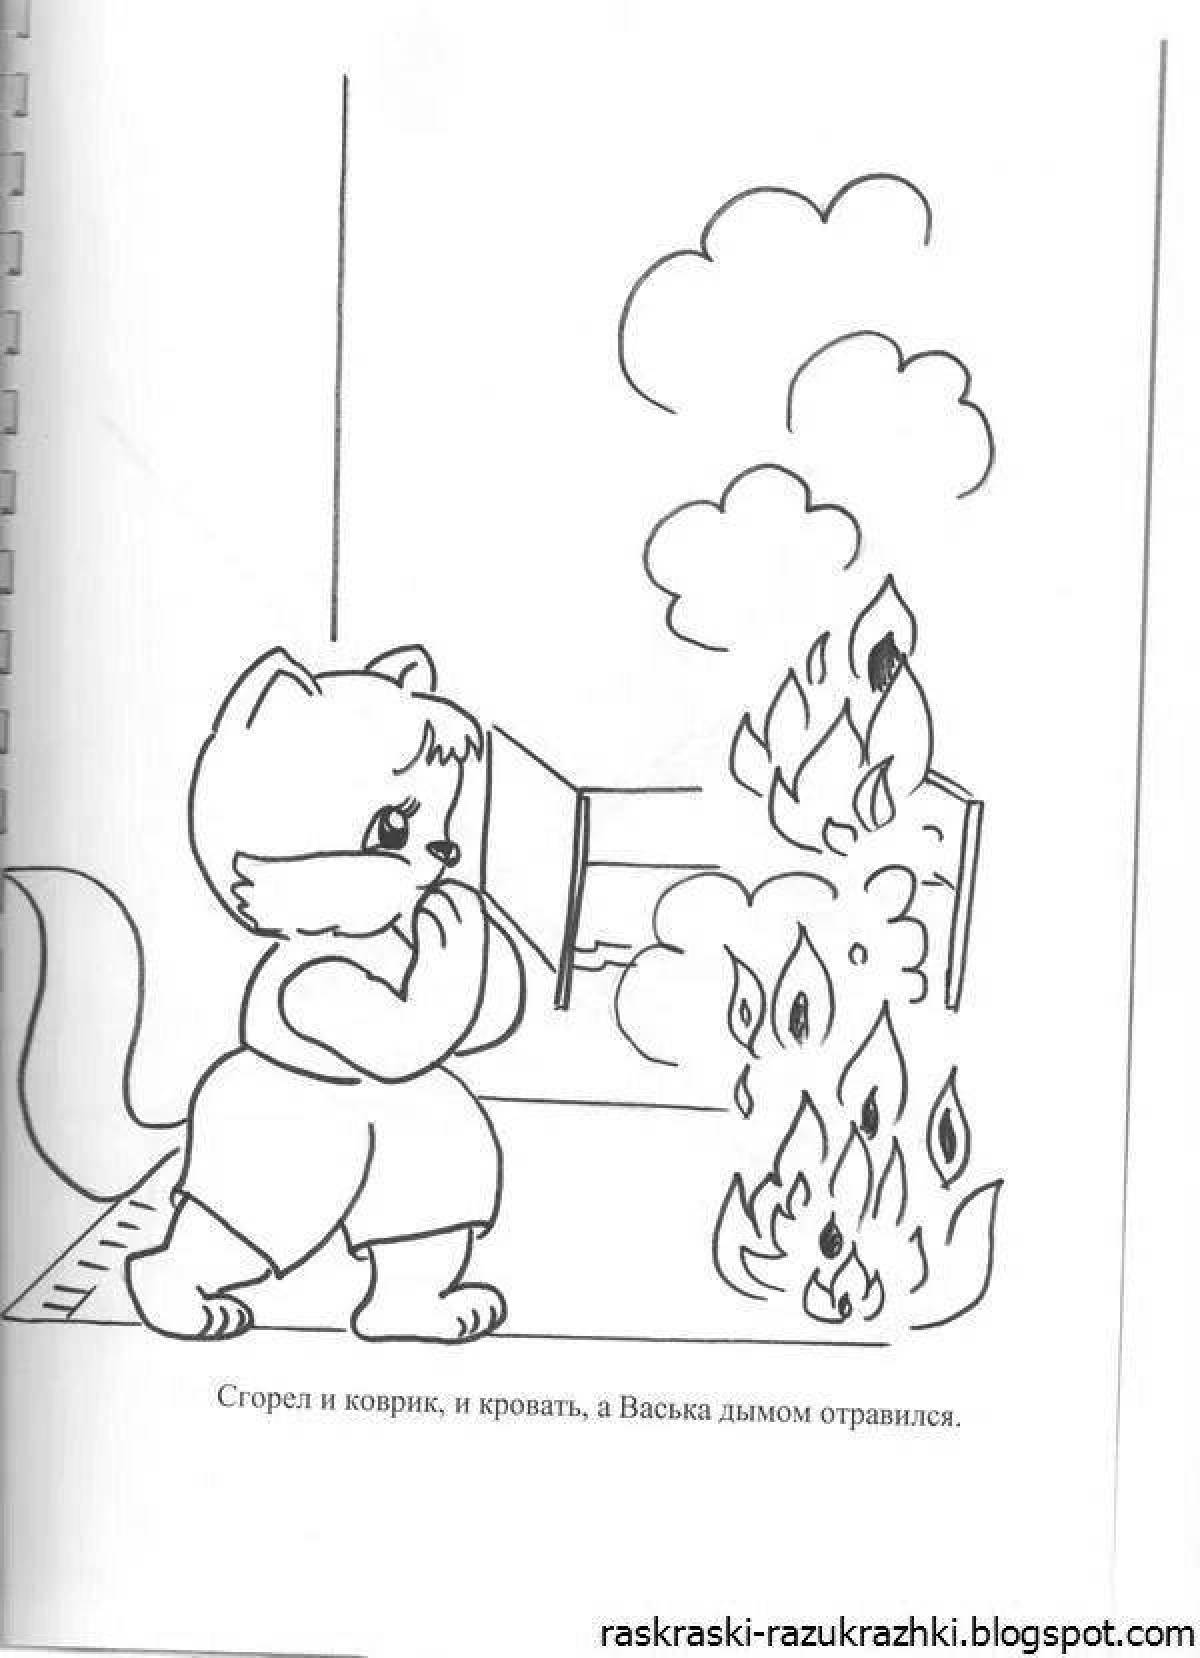 Charming fire safety coloring book for kindergarten